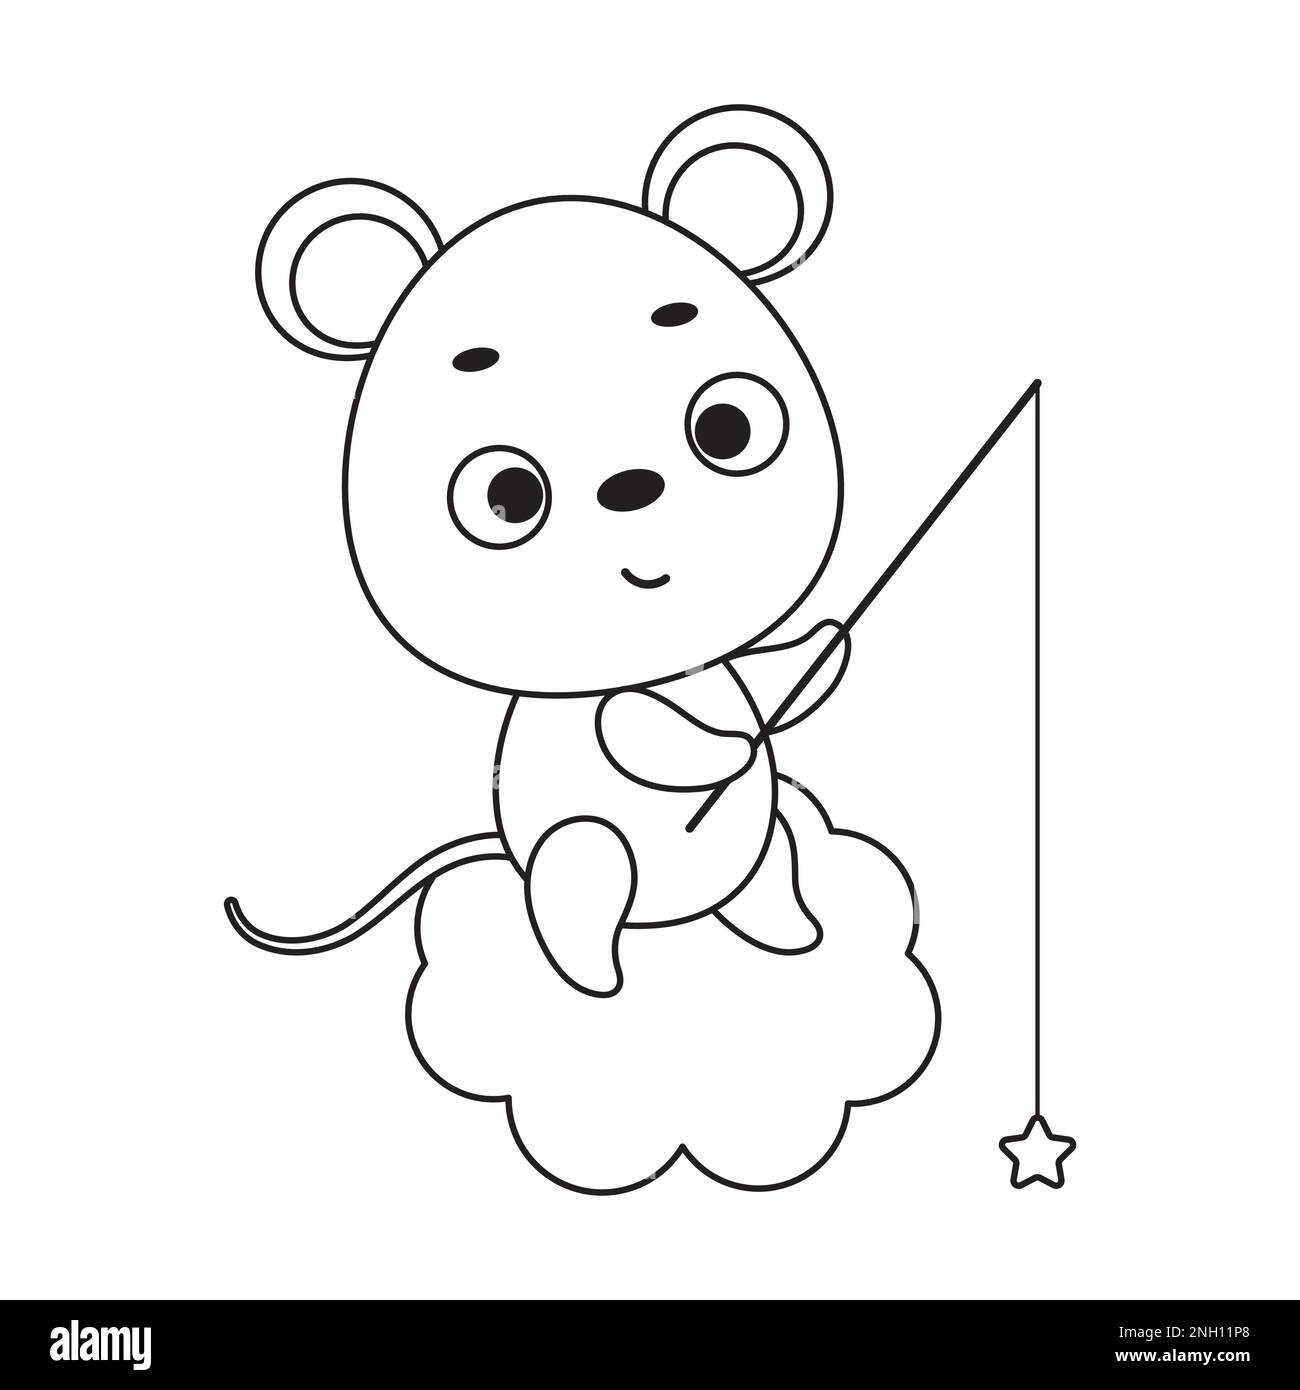 https://c8.alamy.com/comp/2NH11P8/coloring-page-cute-little-mouse-fishing-star-on-cloud-coloring-book-for-kids-educational-activity-for-preschool-years-kids-and-toddlers-with-cute-2NH11P8.jpg